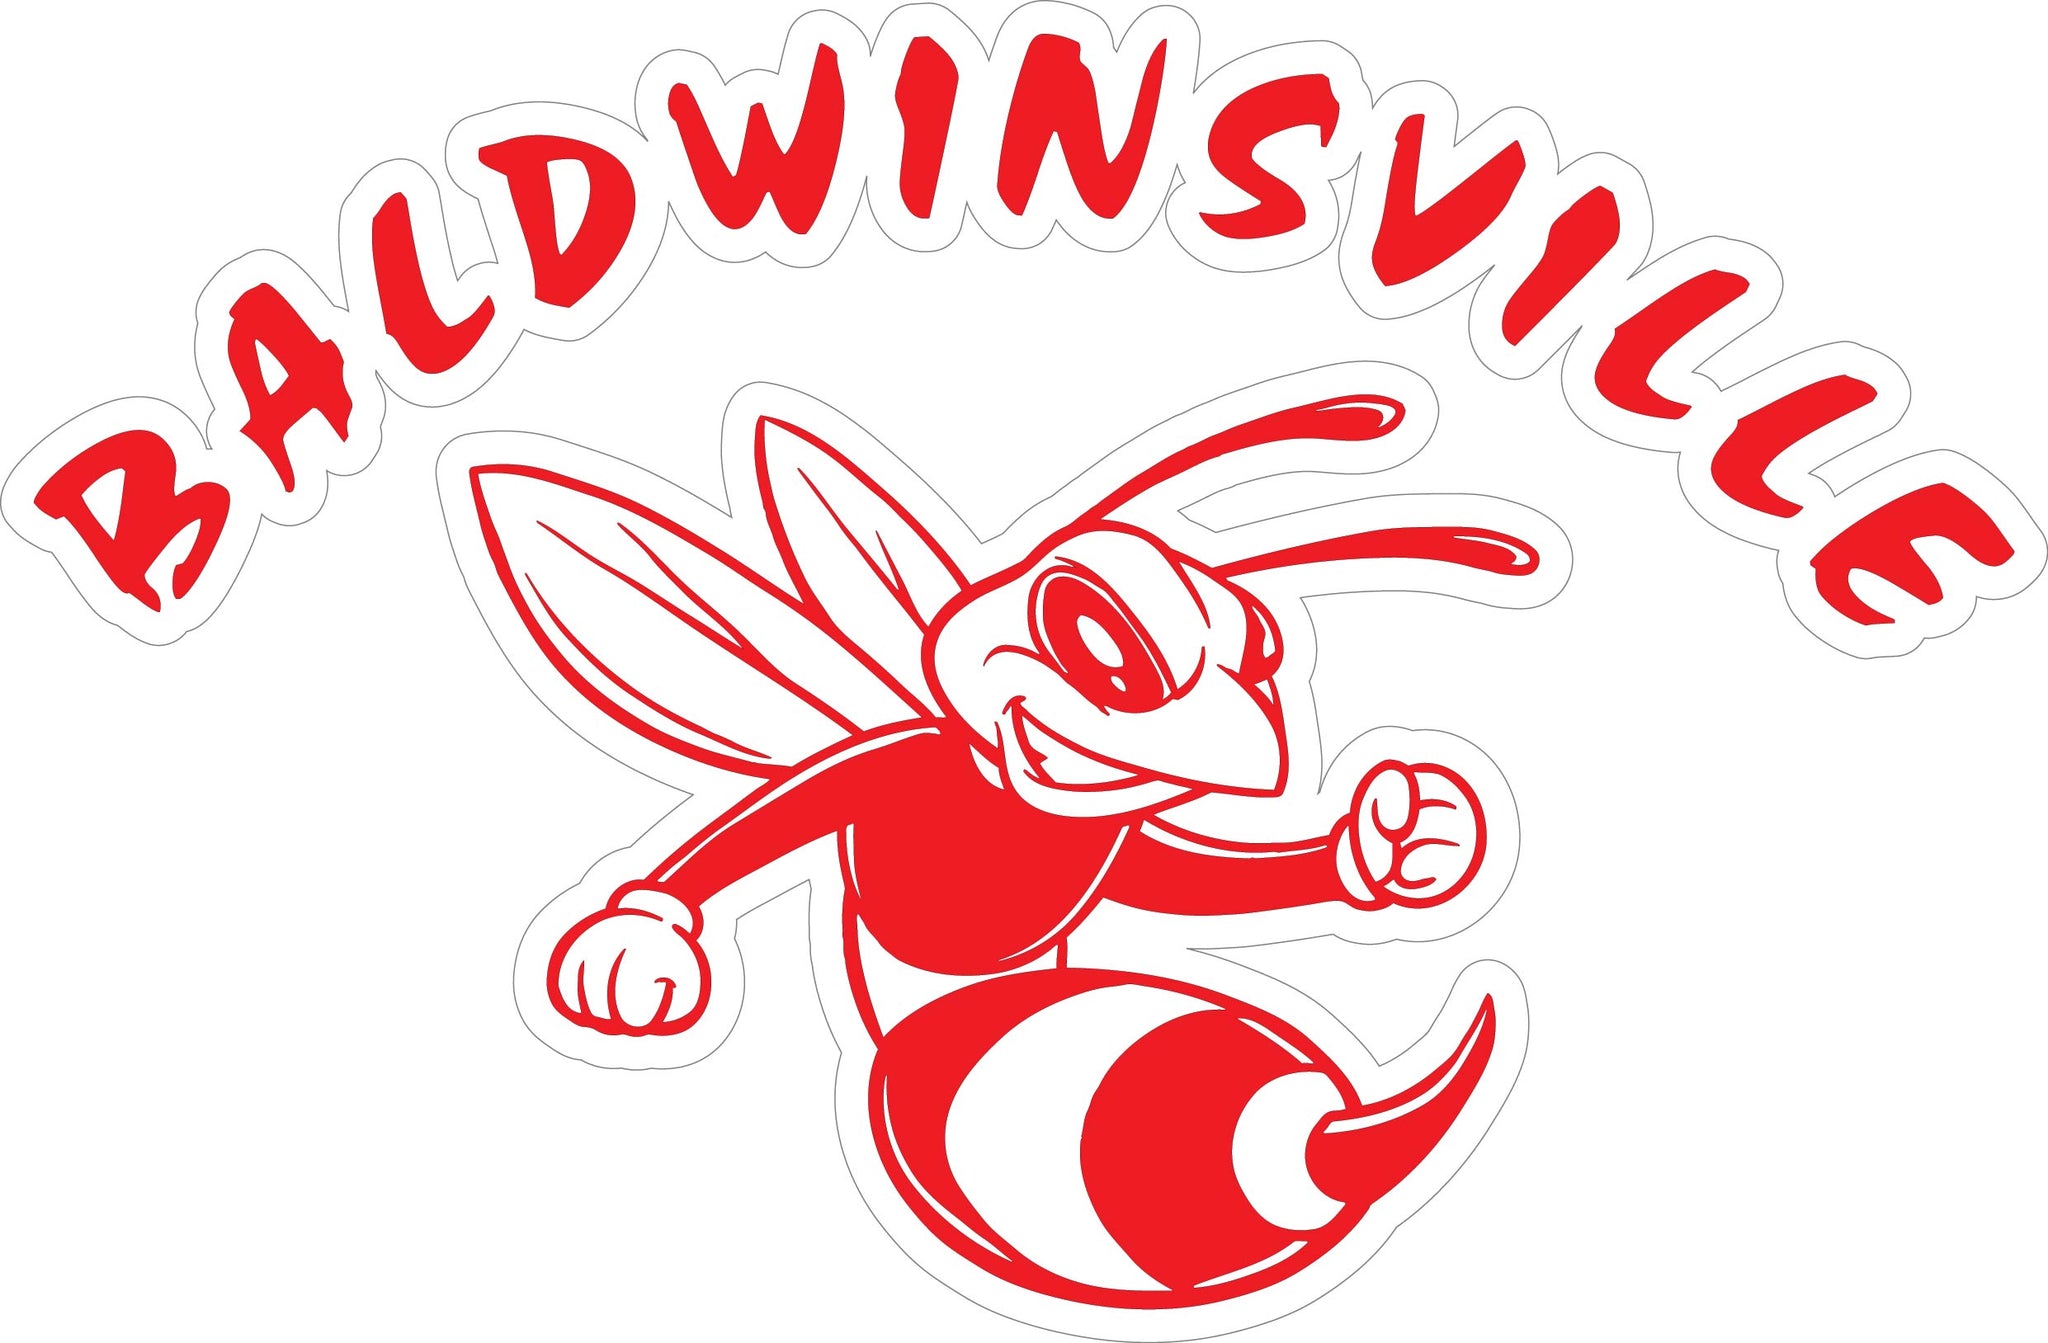 "Baldwinsville" Bee in Red Decal